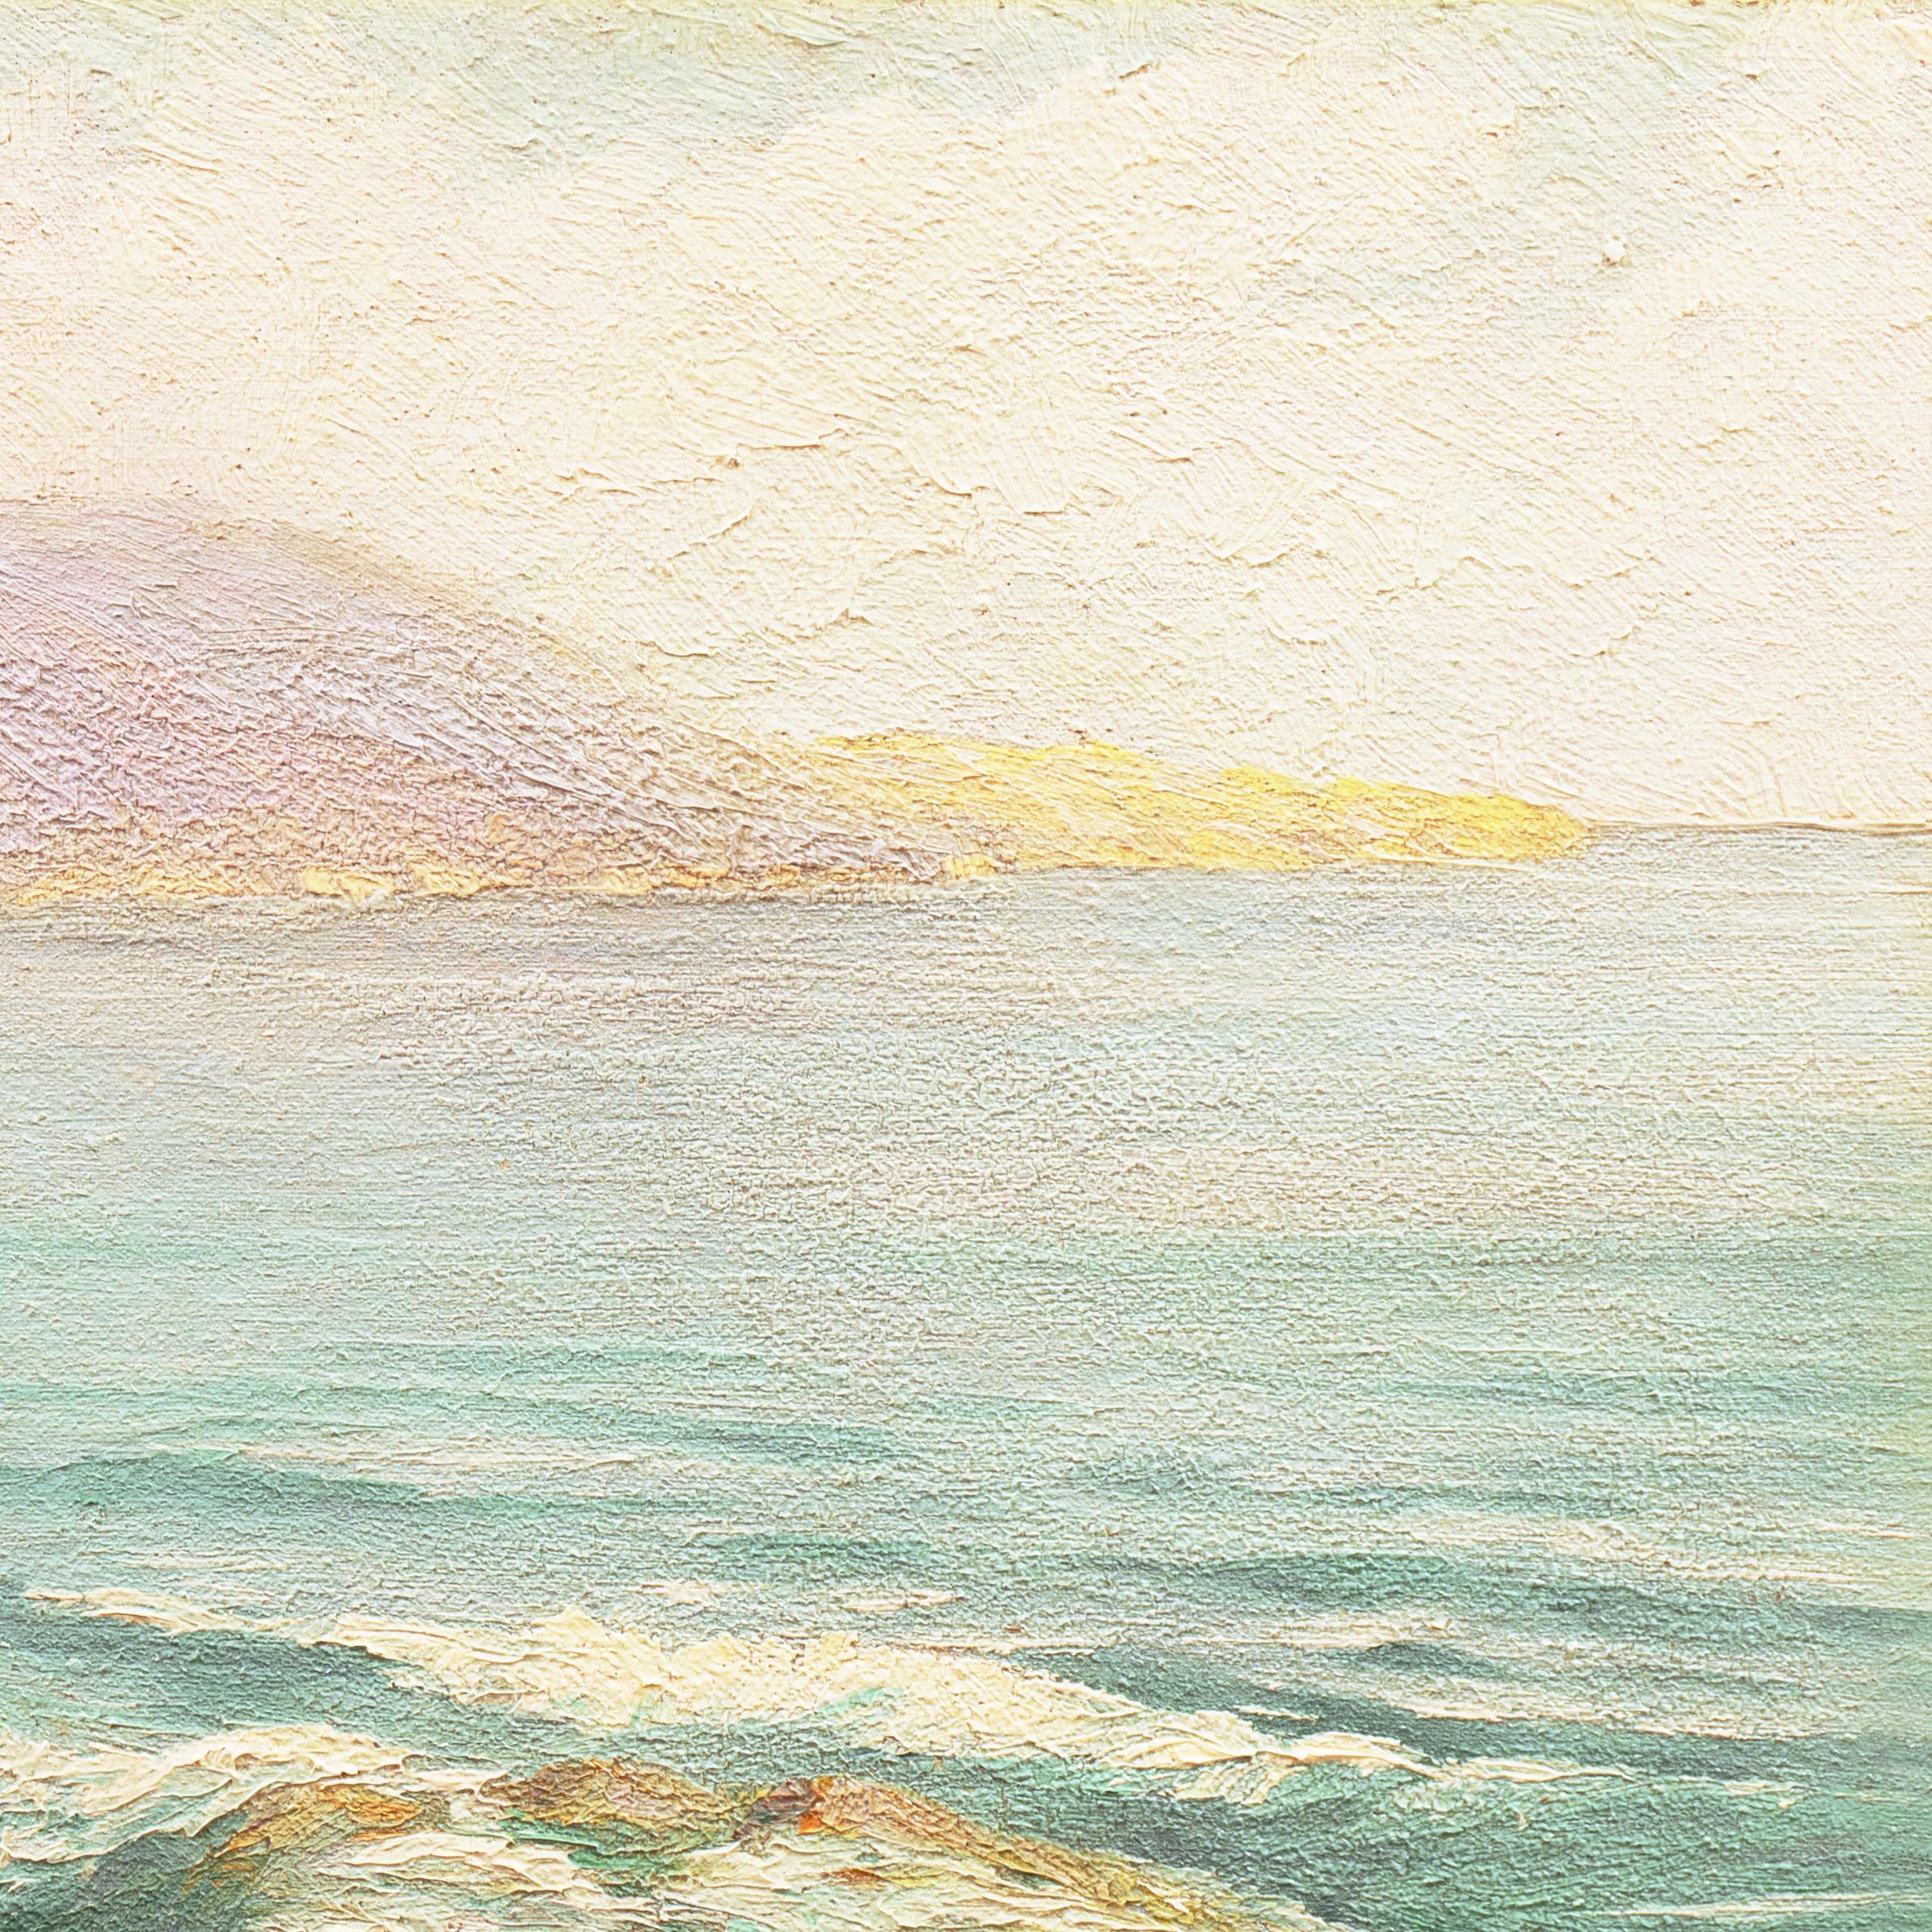  'California Headlands with a View of the Pacific', SFAA, Laguna Beach, ASL NYC - American Impressionist Painting by Frank William Cuprien